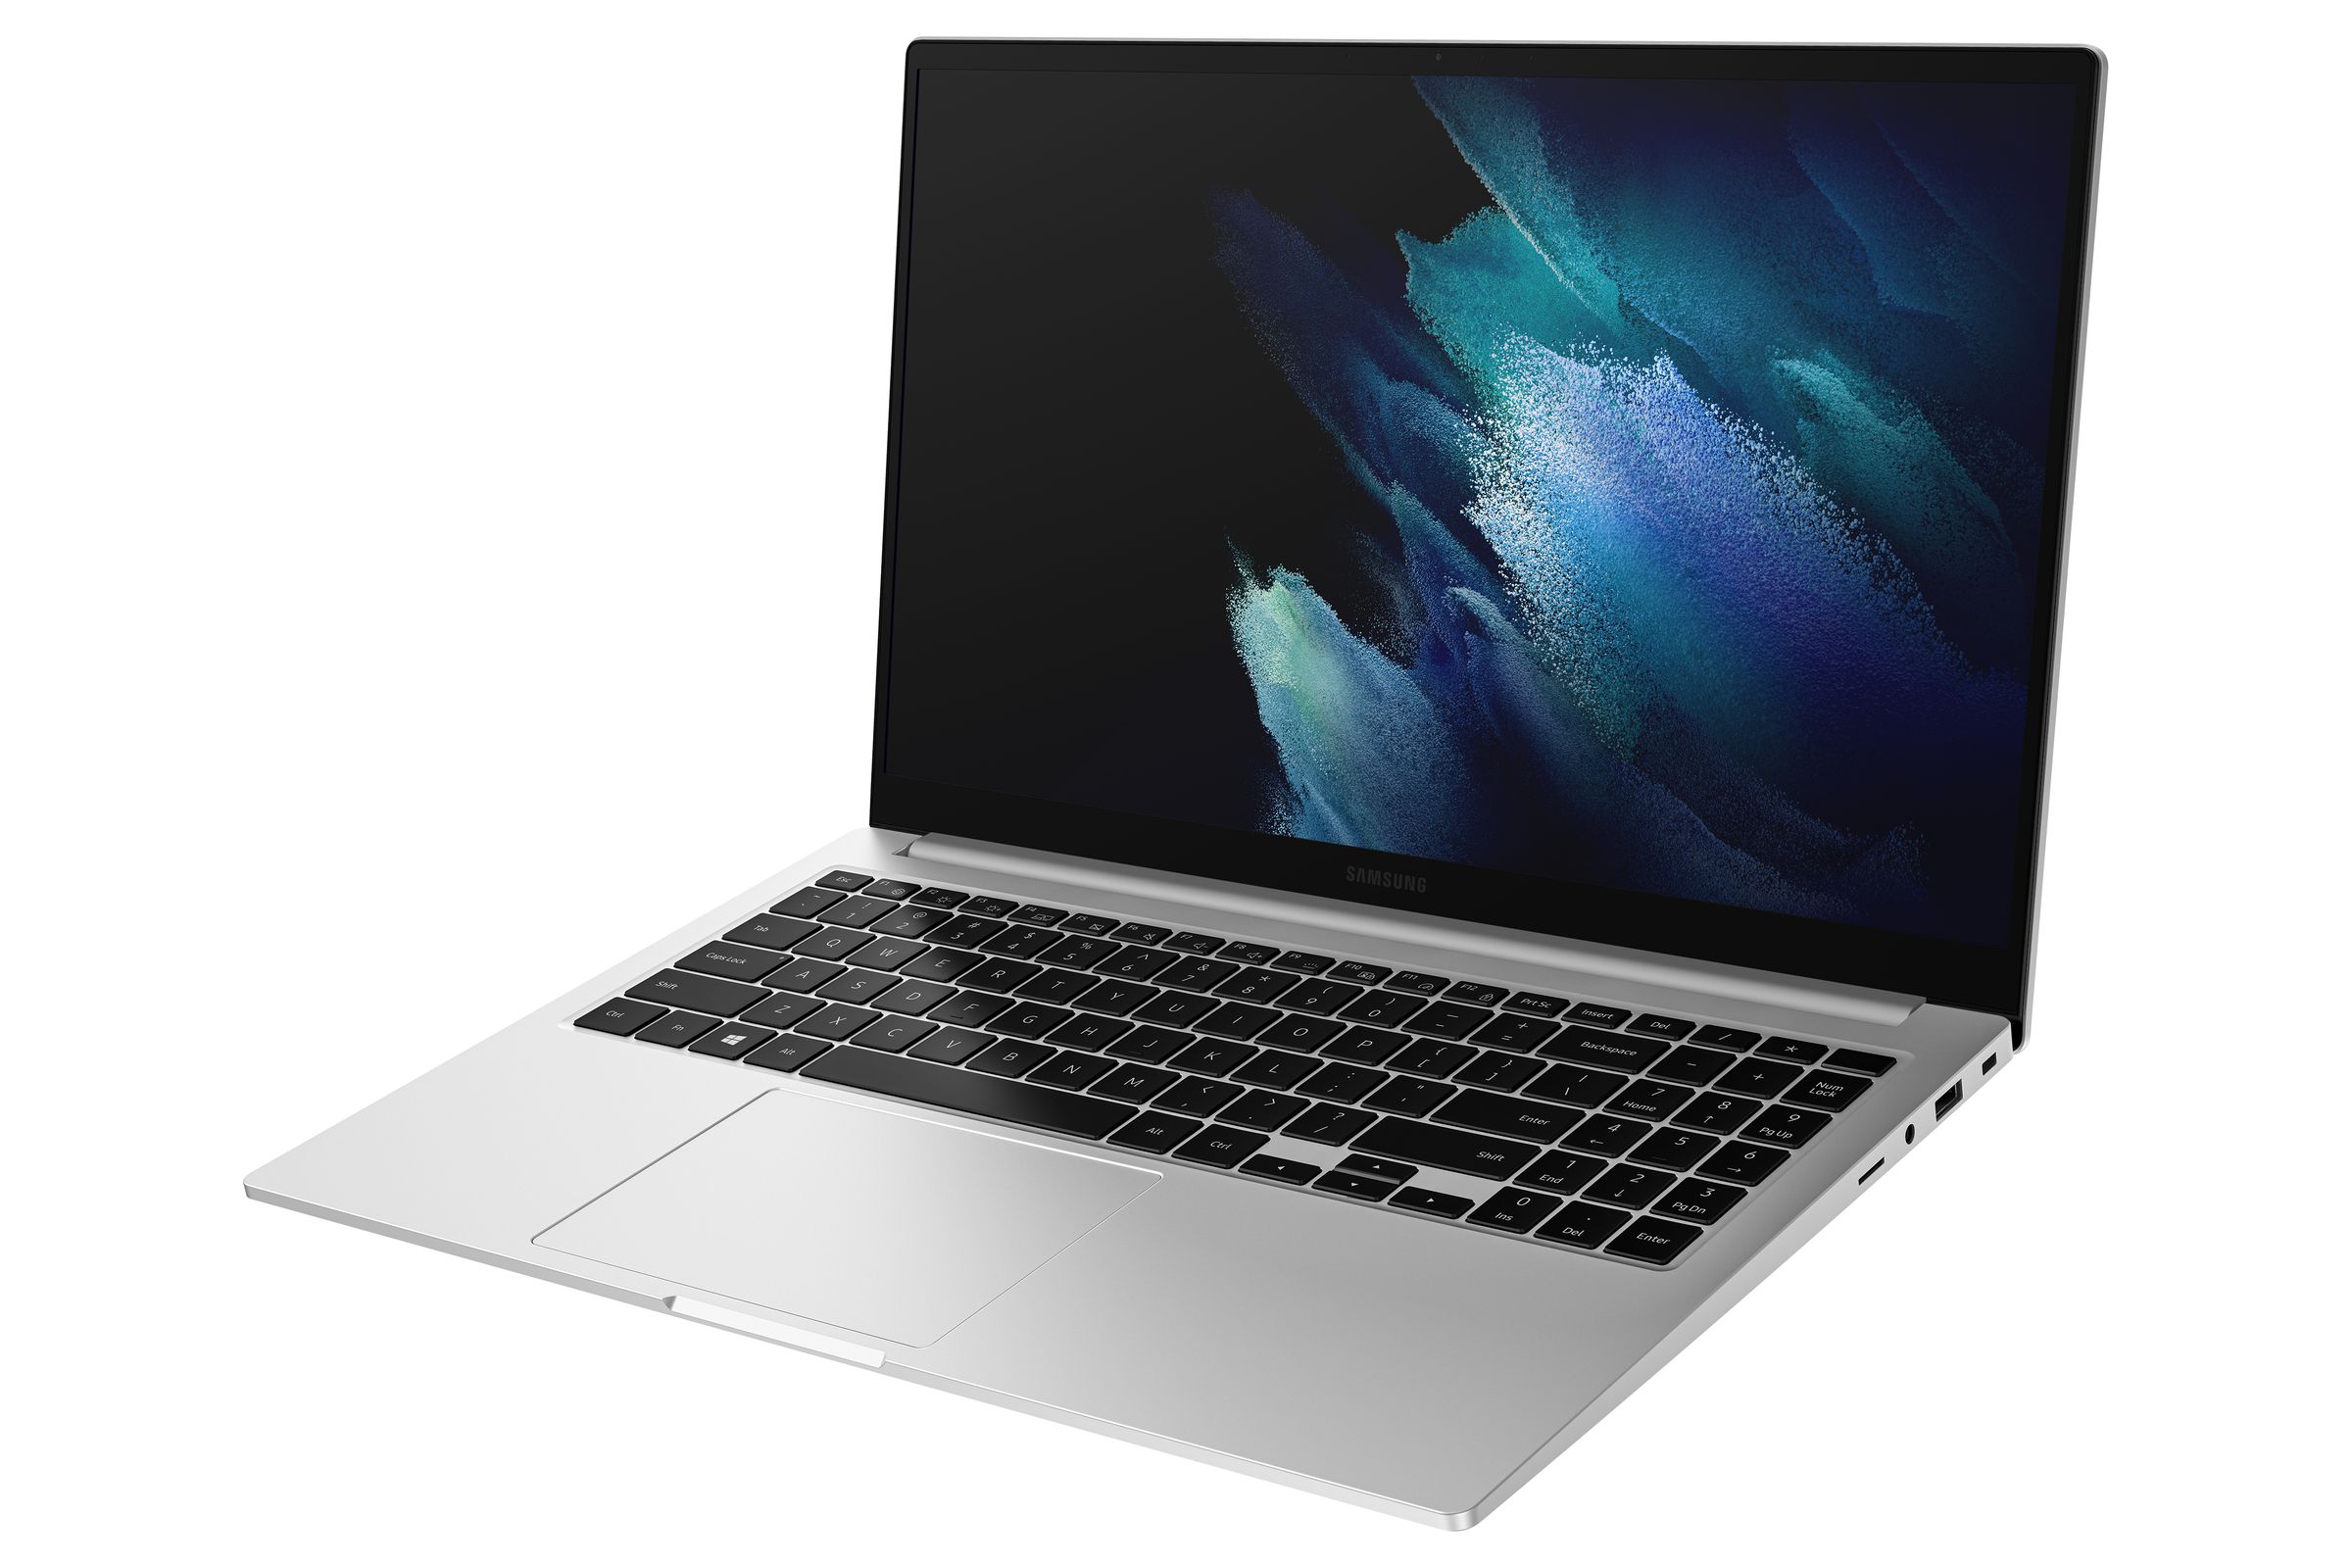 The Samsung Galaxy Book open, angled to the left, on a white background. The screen displays a blue and black pattern.